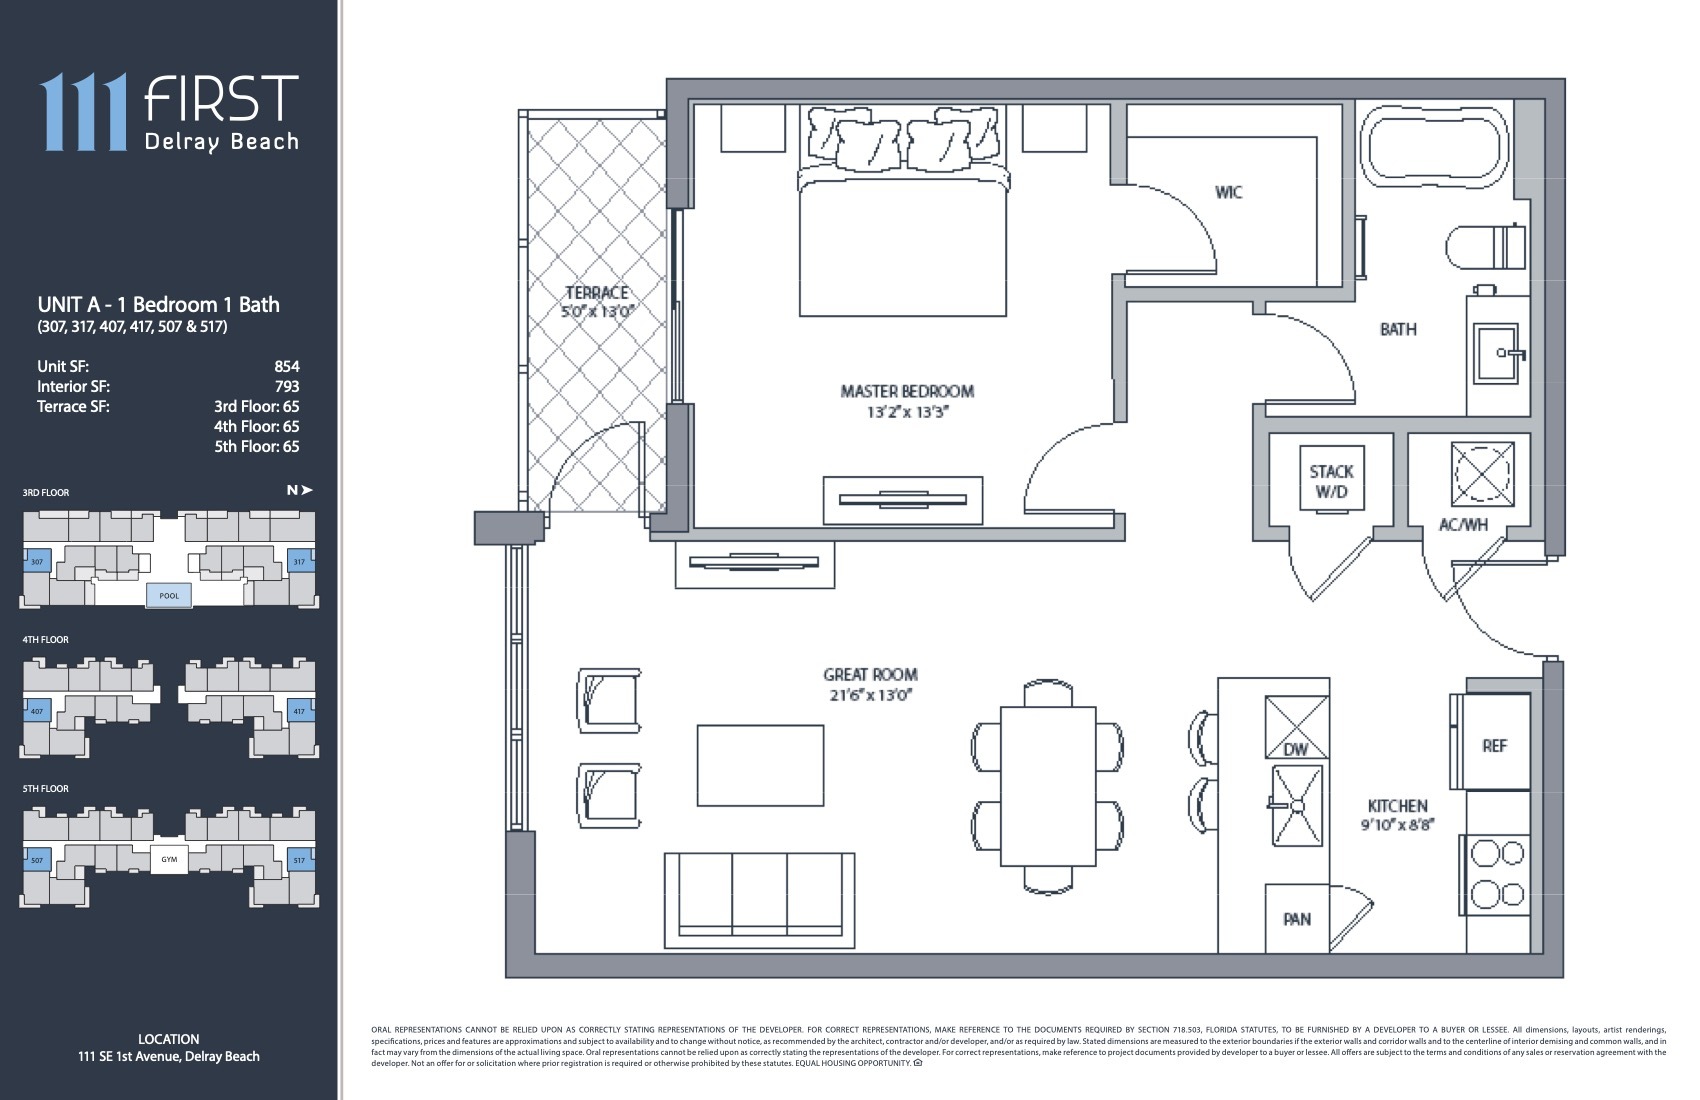 Floor Plan for 111 First Delray Floorplans, Unit A